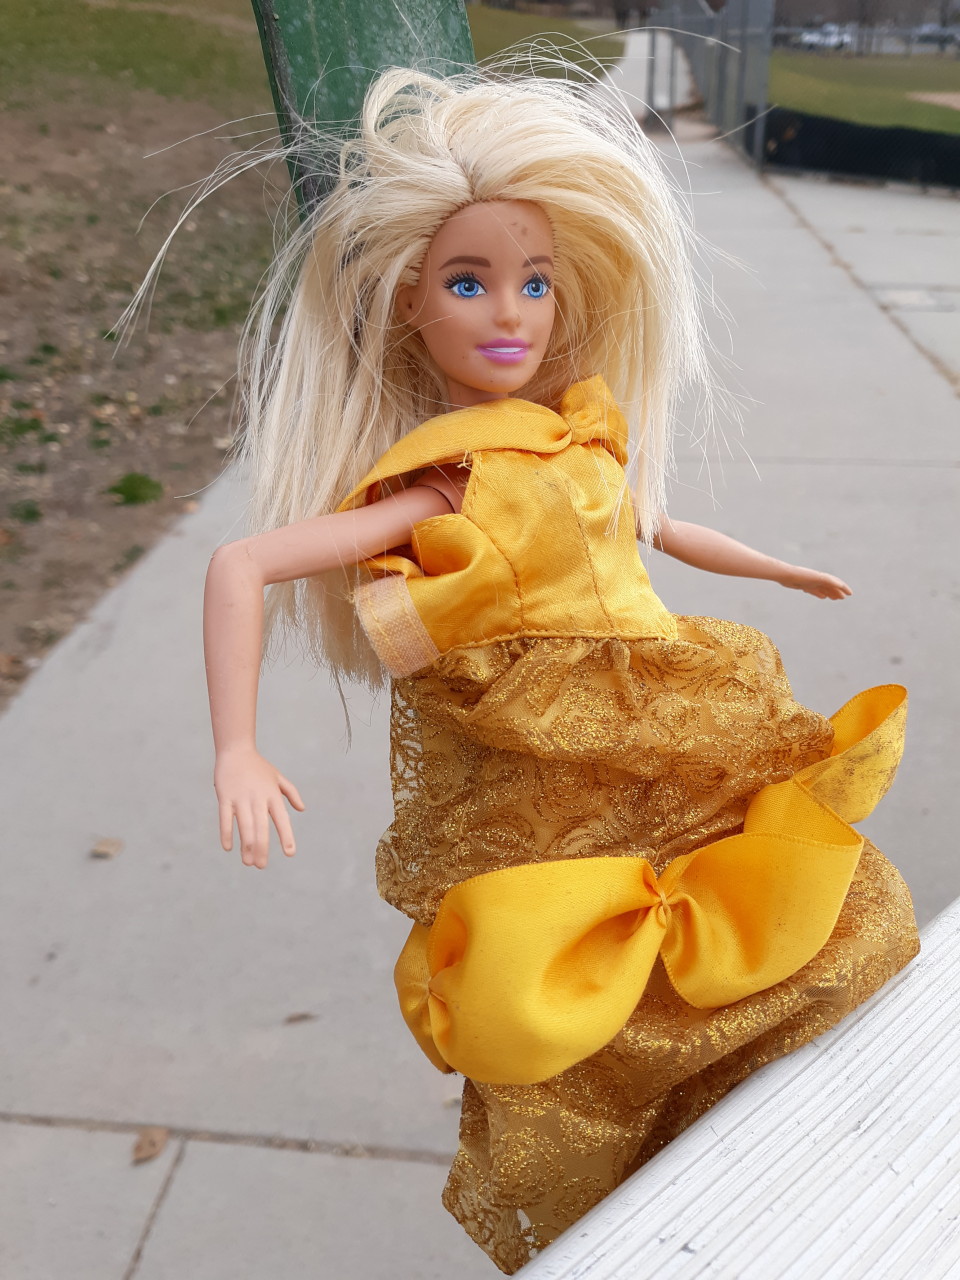 A Lost Barbie